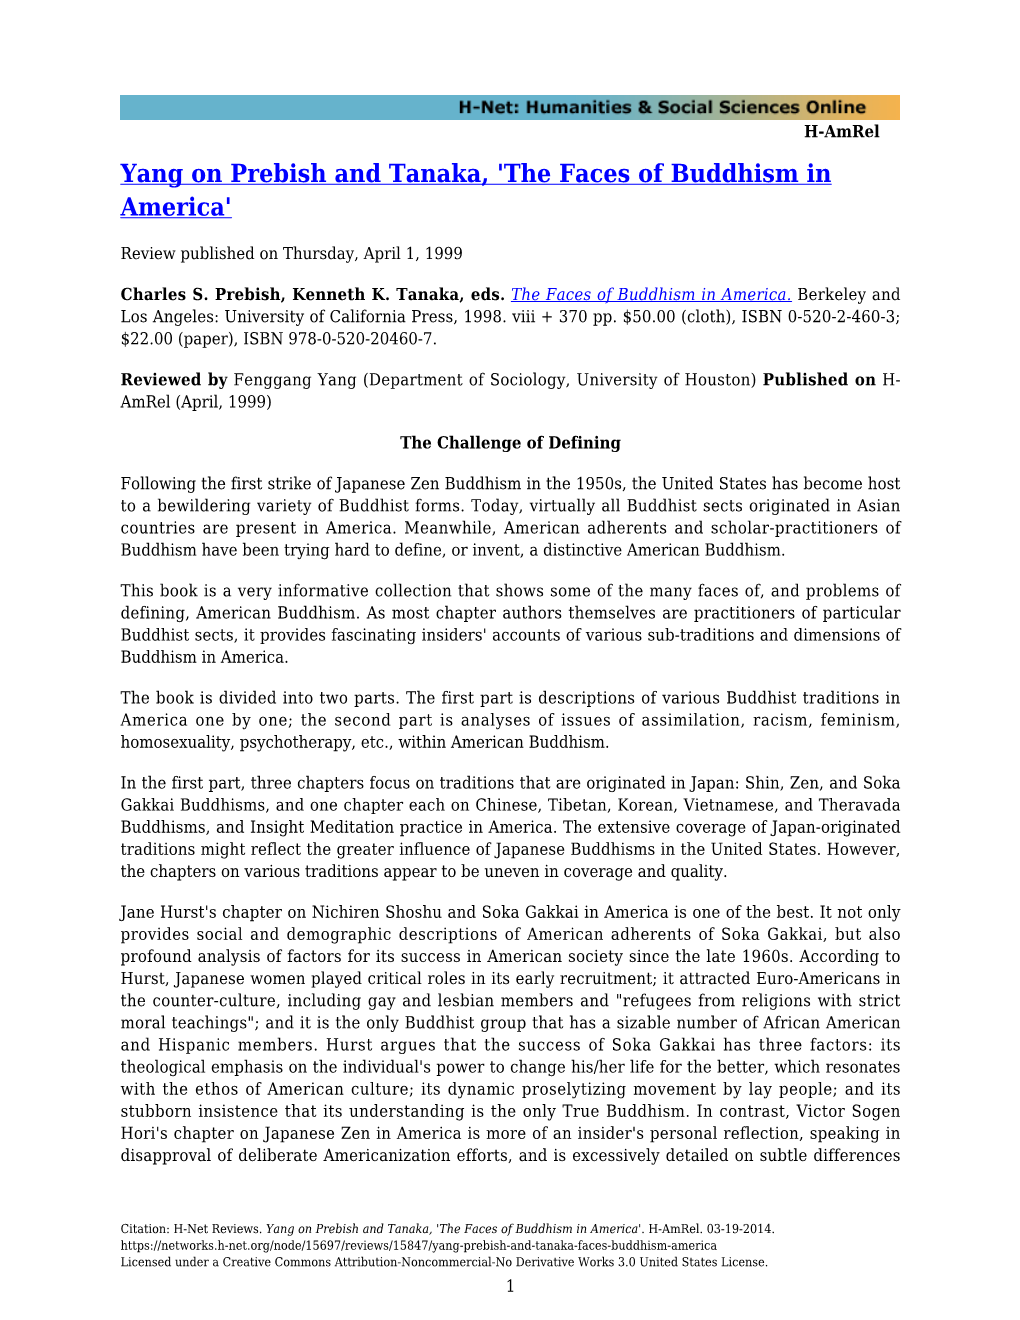 Yang on Prebish and Tanaka, 'The Faces of Buddhism in America'